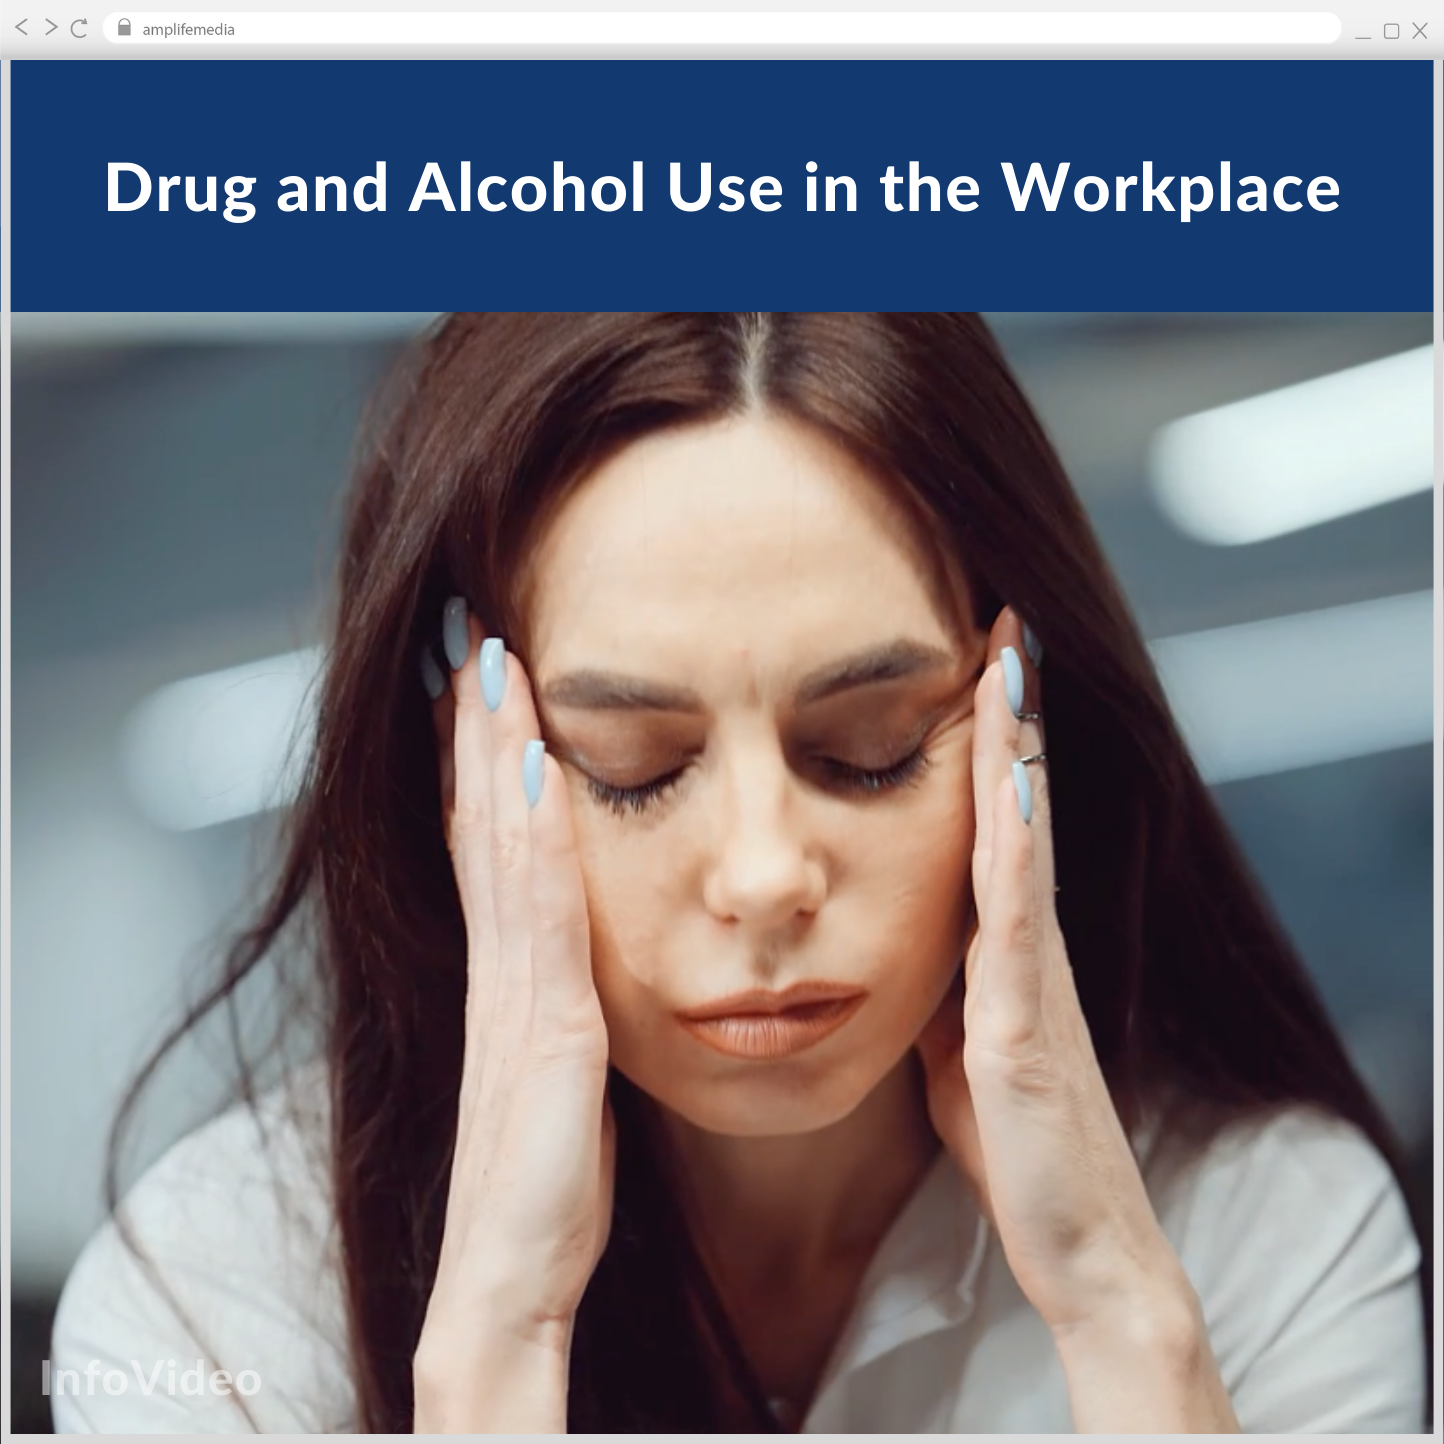 Subscription to Wellbeing Media: Drug and Alcohol Use in the Workplace IV 123